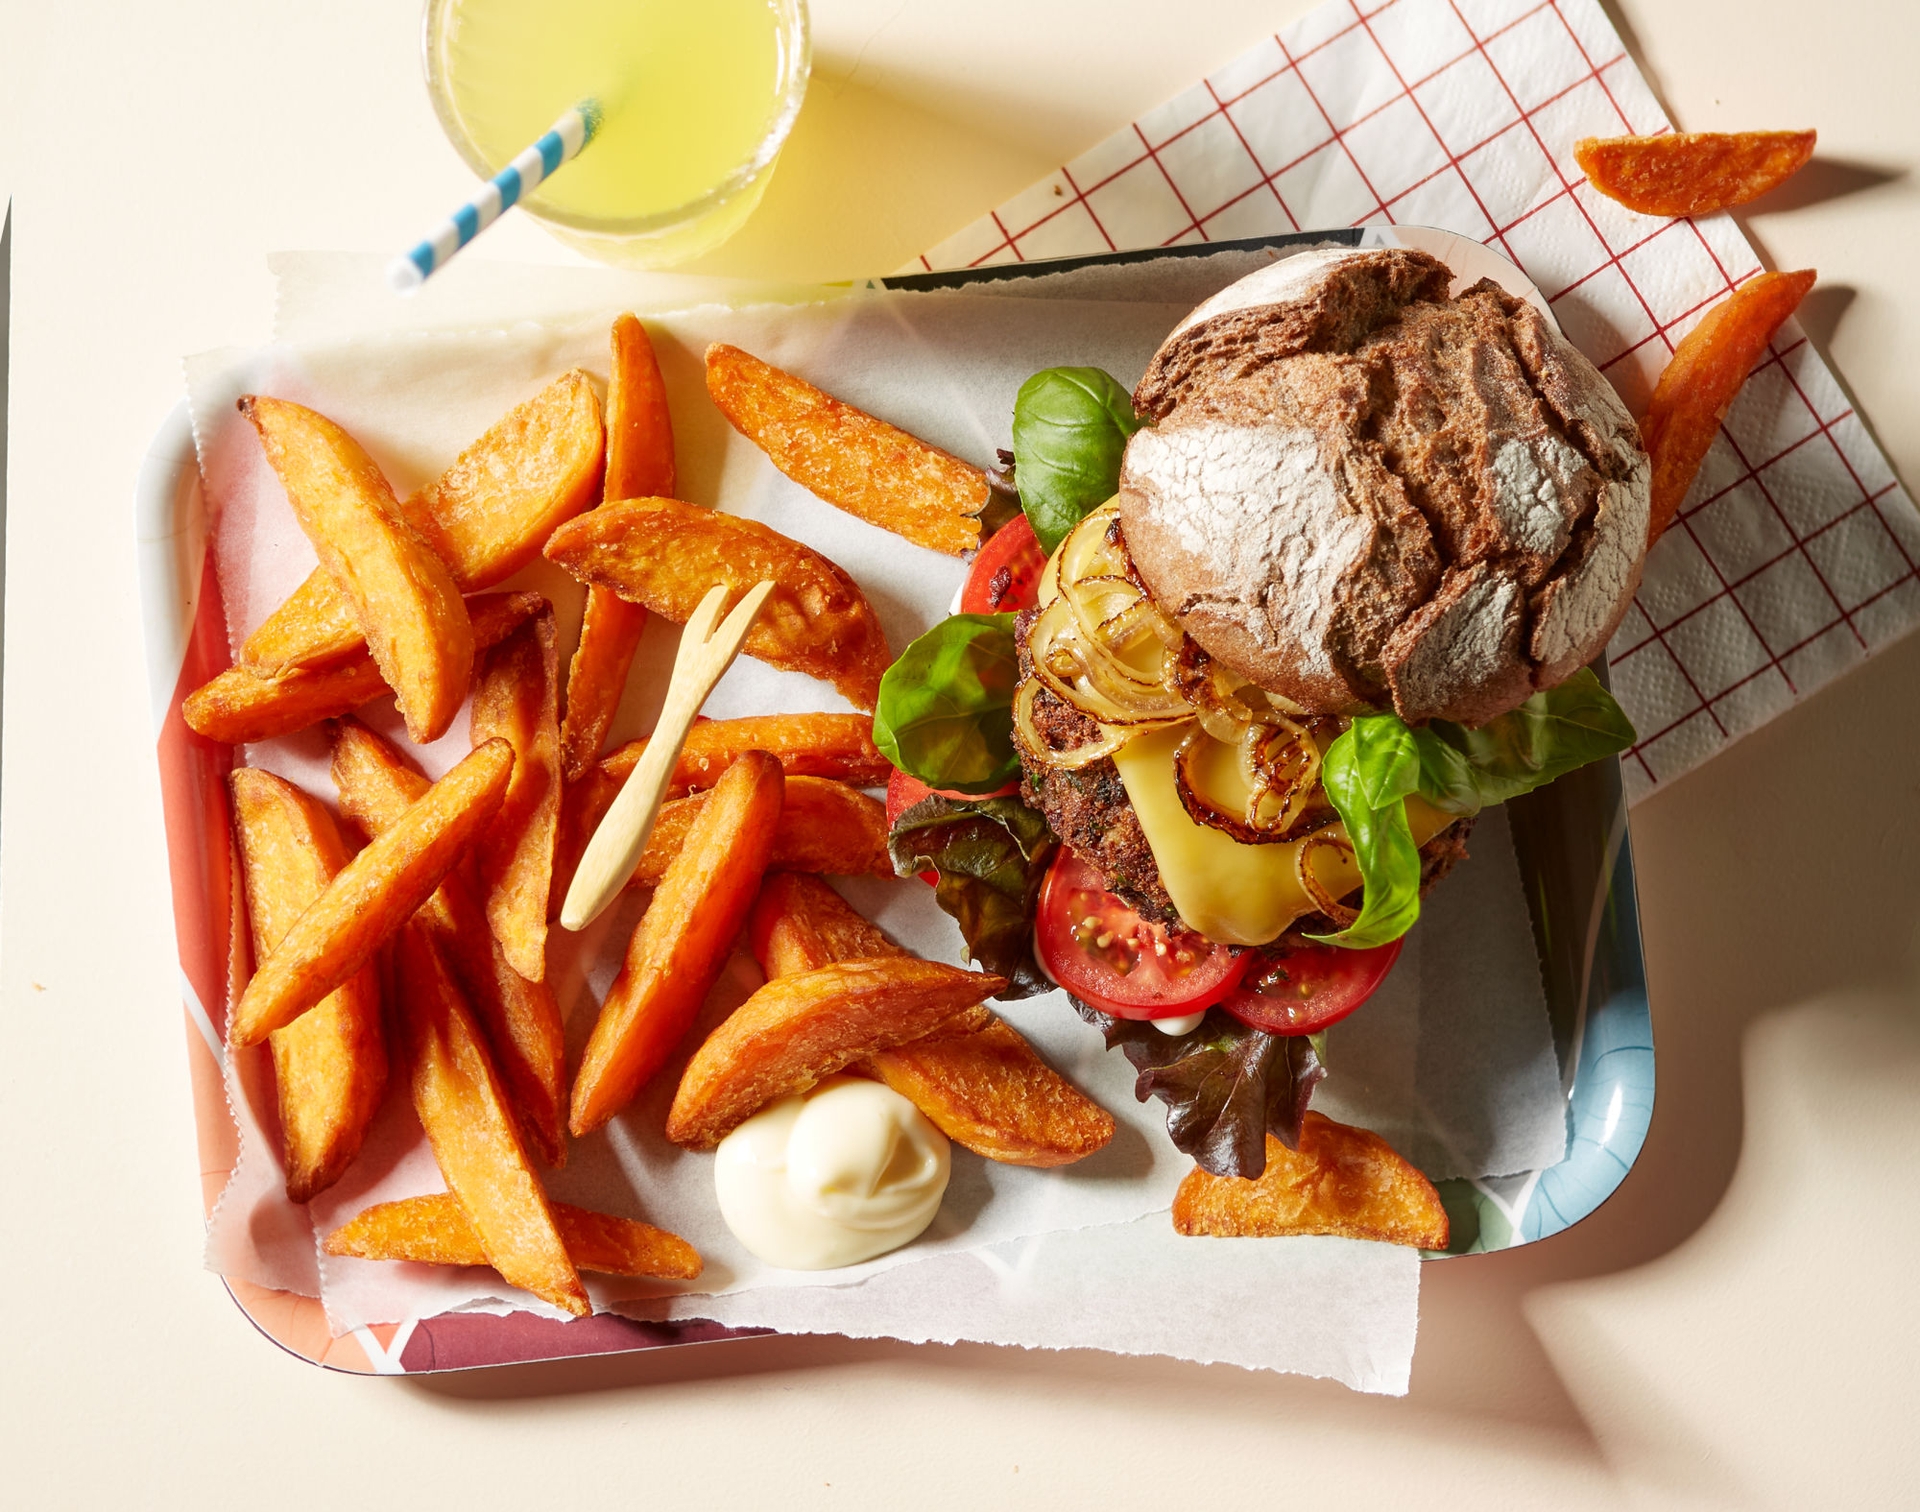 Fast casual dining sweet wedge burger